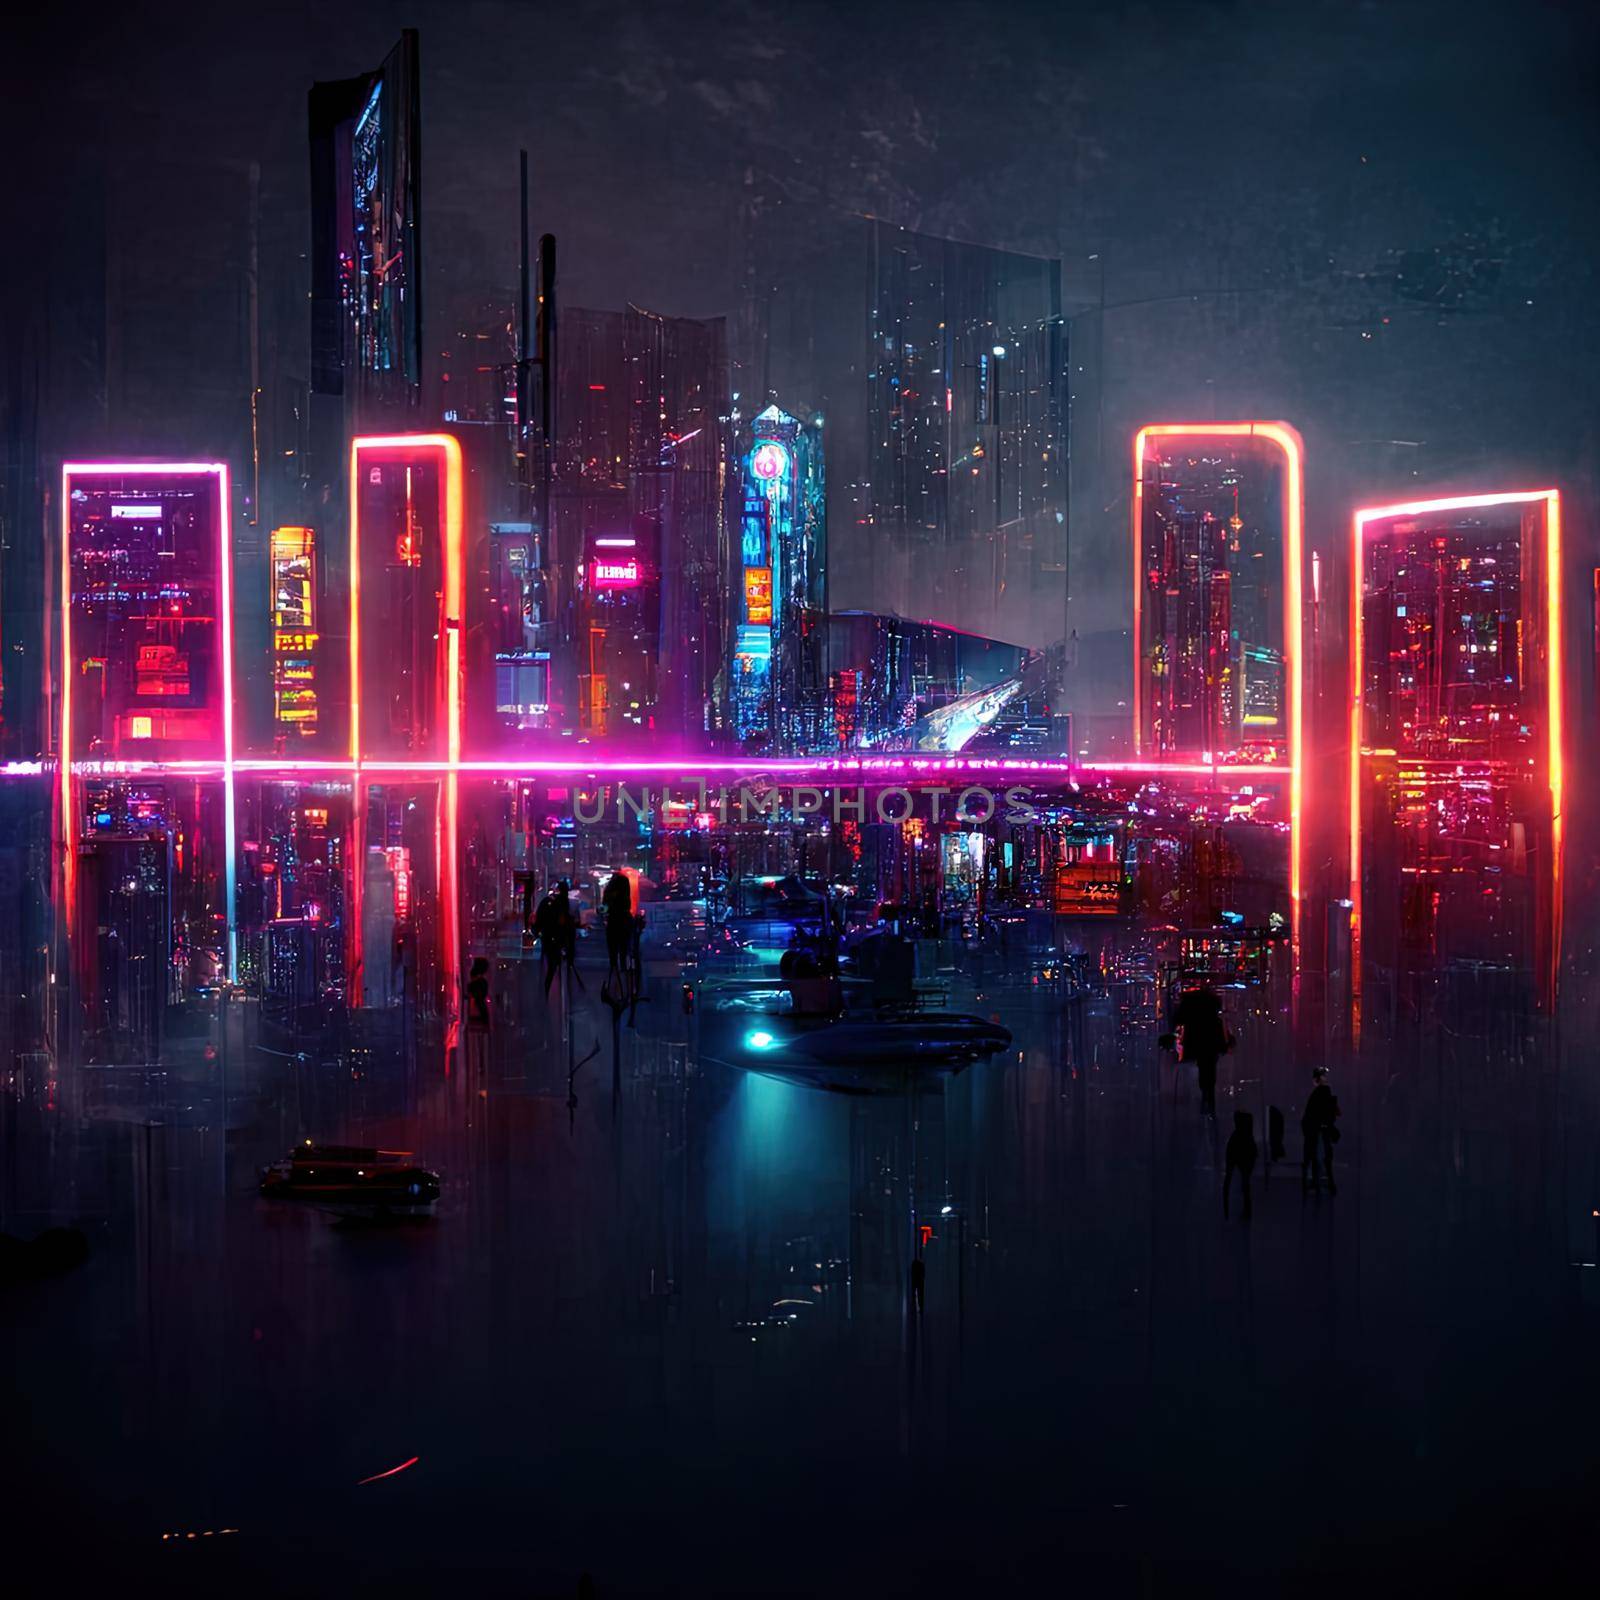 Futuristic metaverse city concept with glowing neon lights by 2ragon